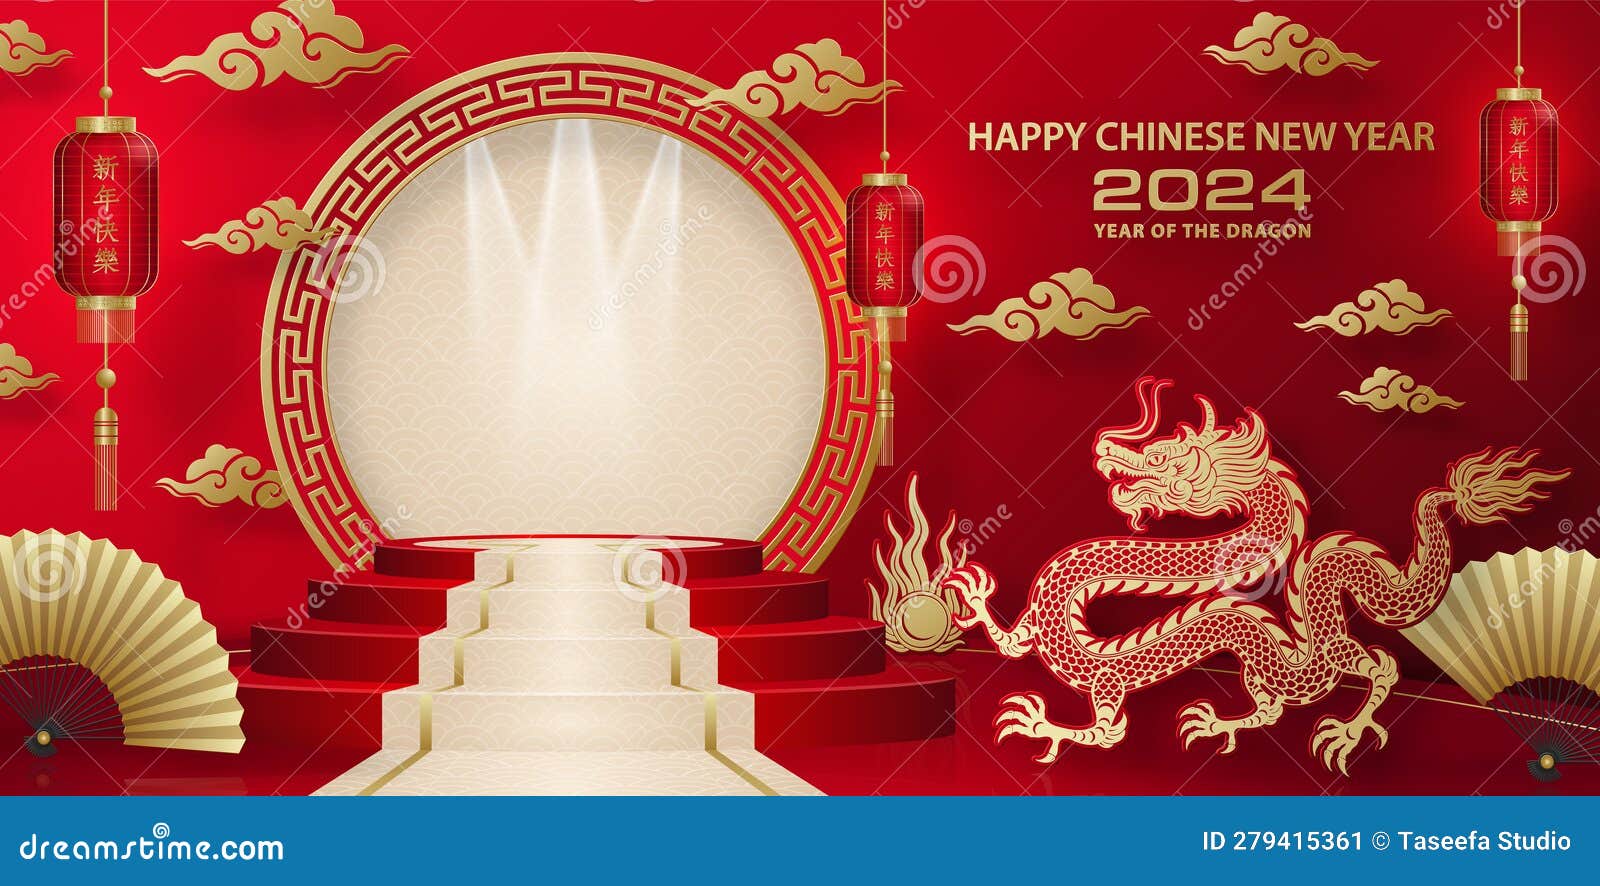 3d podium round stage for happy chinese new year 2024 dragon zodiac sign